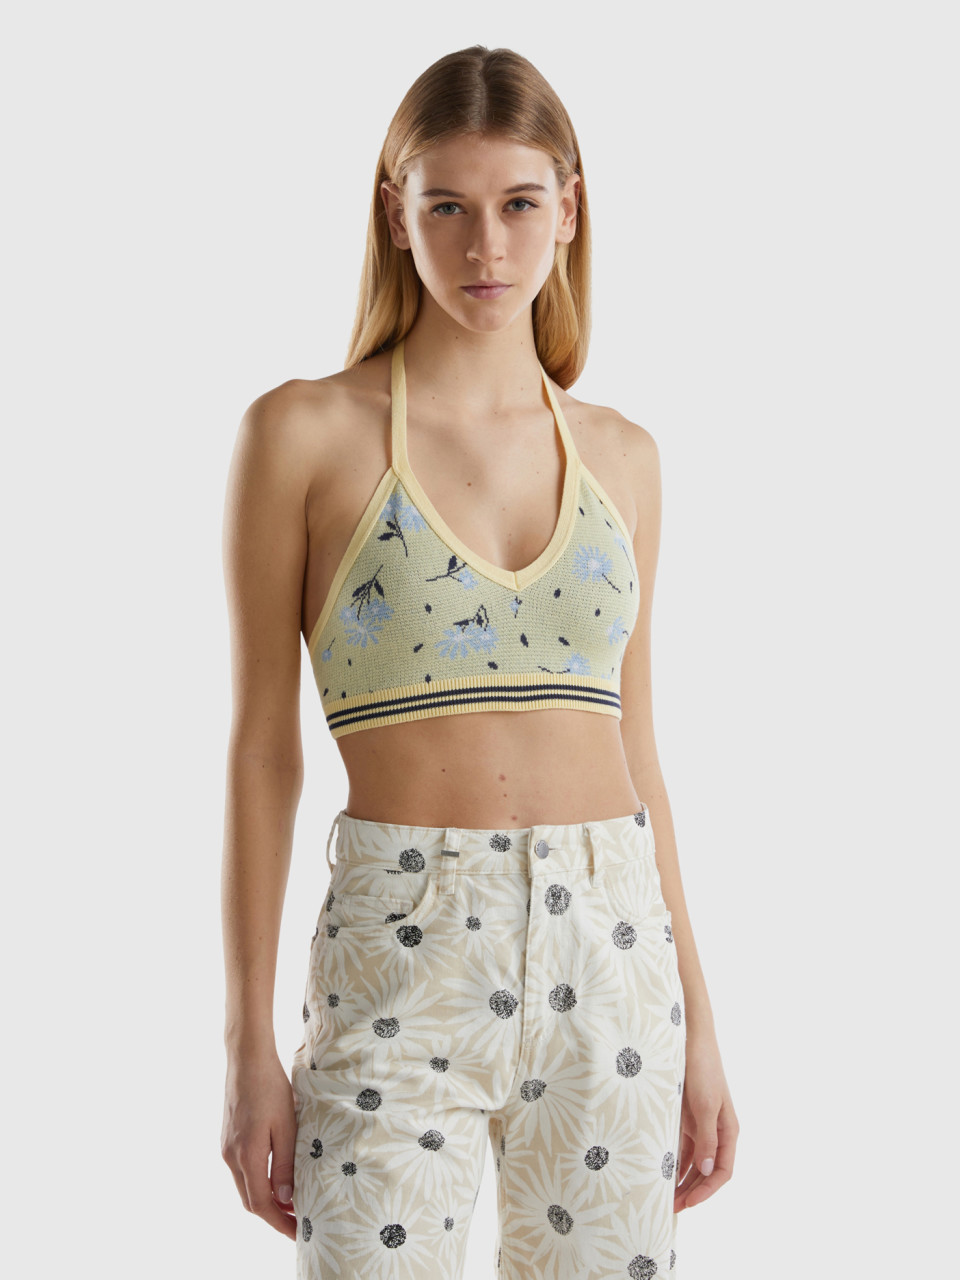 Benetton, Cropped Top In Floral Knit, Yellow, Women